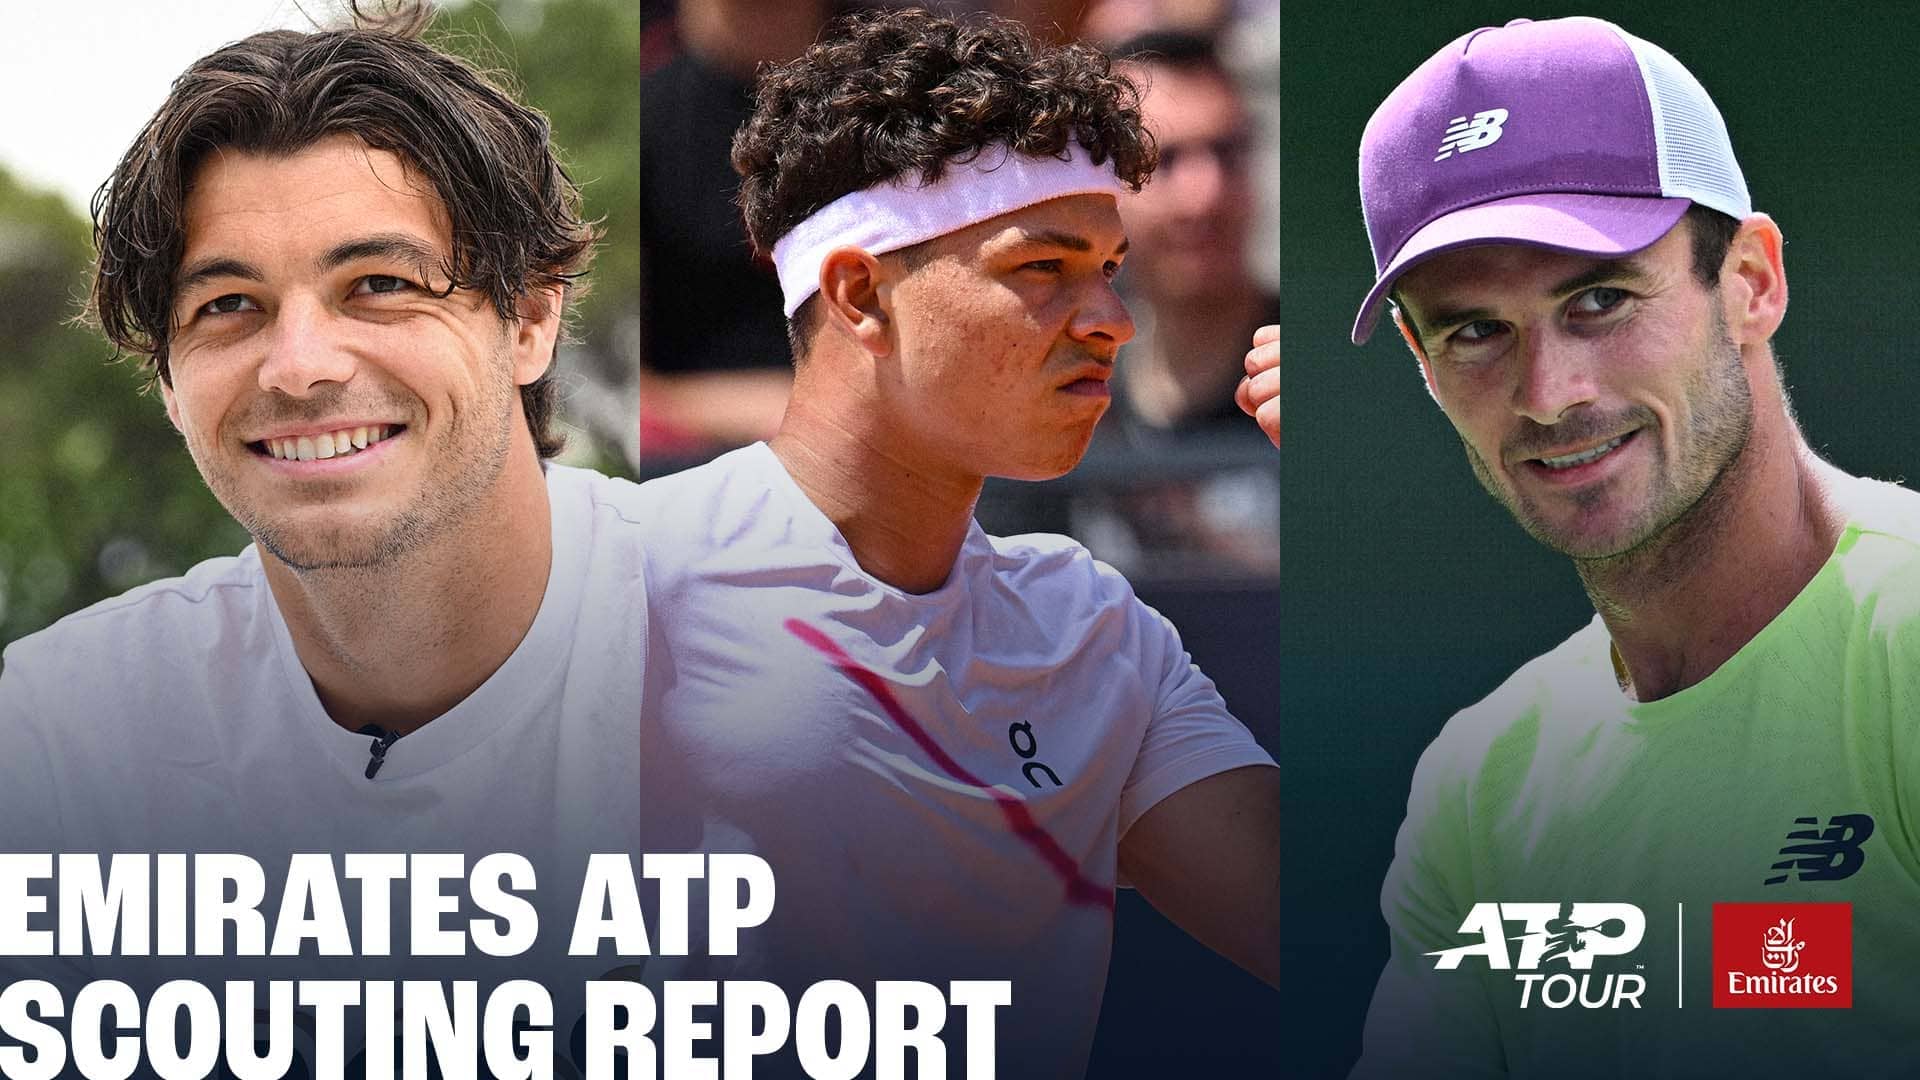 Taylor Fritz, Ben Shelton and Tommy Paul are in action at ATP 250 events this week.